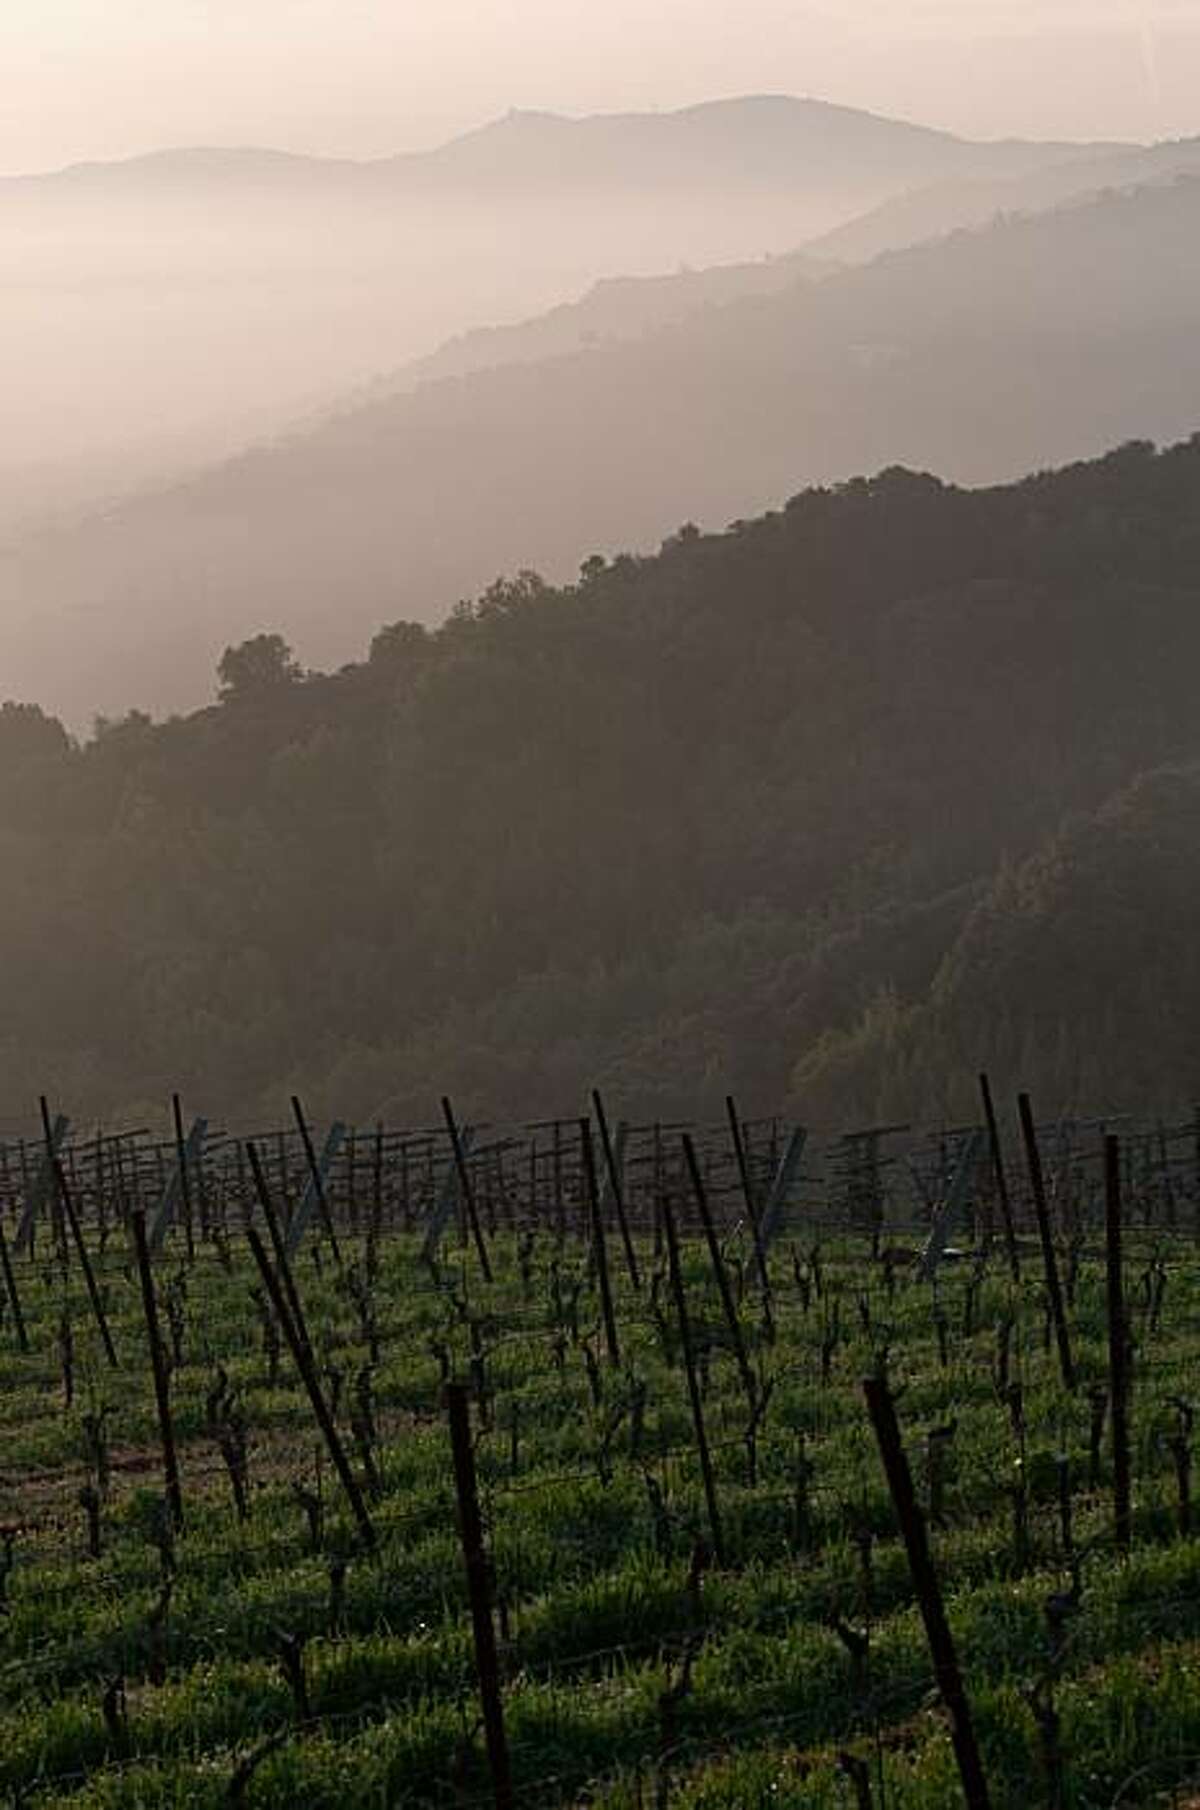 The sun rises over over a light fog and the dormant grape vines of Mount Eden Vineyards in the Santa Cruz Mountains on Wednesday, February 17, 2010.